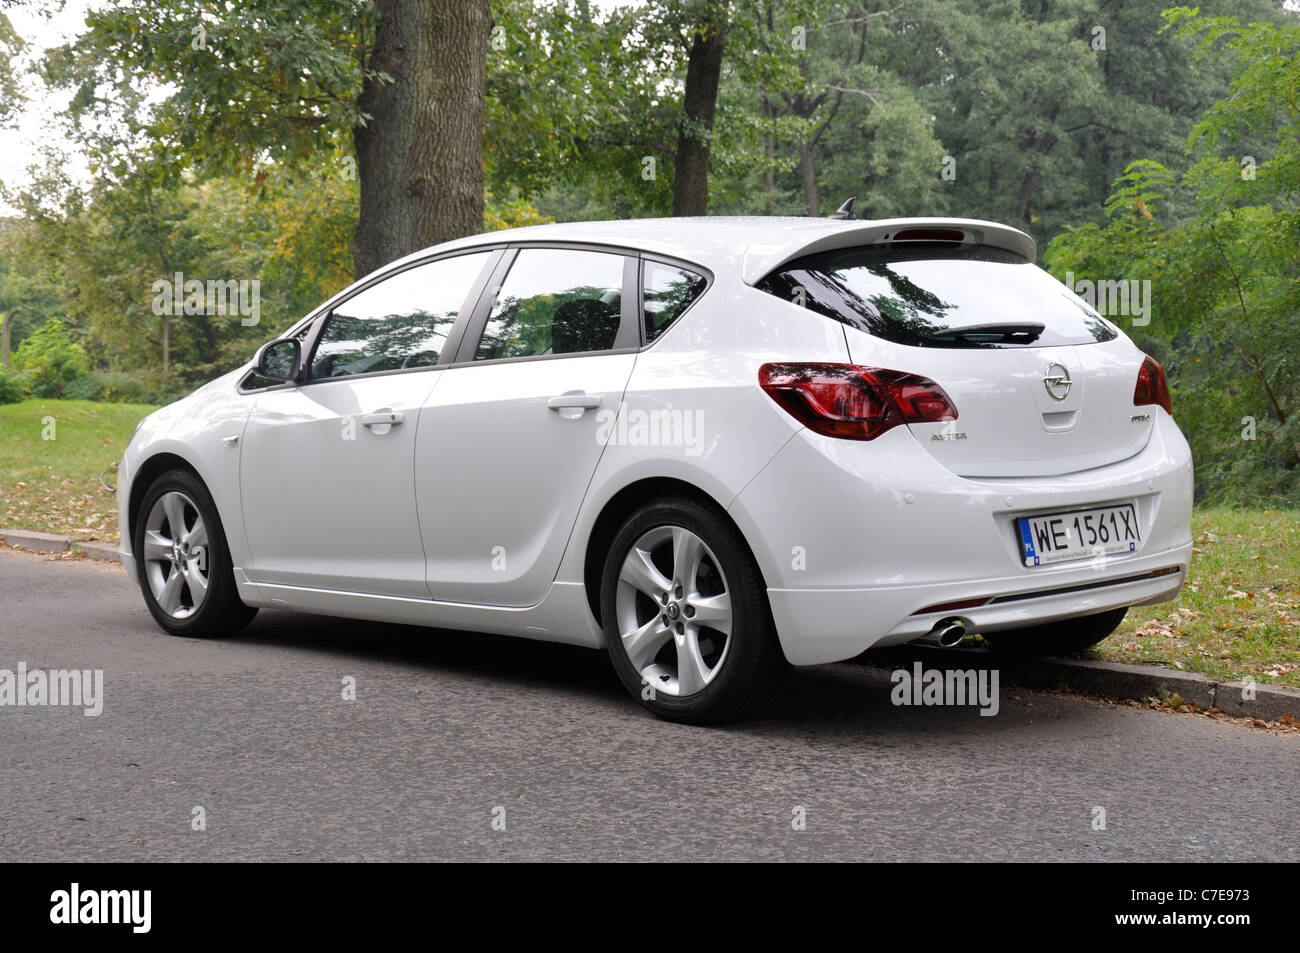 Opel Astra IV 1.4 Turbo - MY 2009 - white - German compact car, segment C - in a park Stock Photo